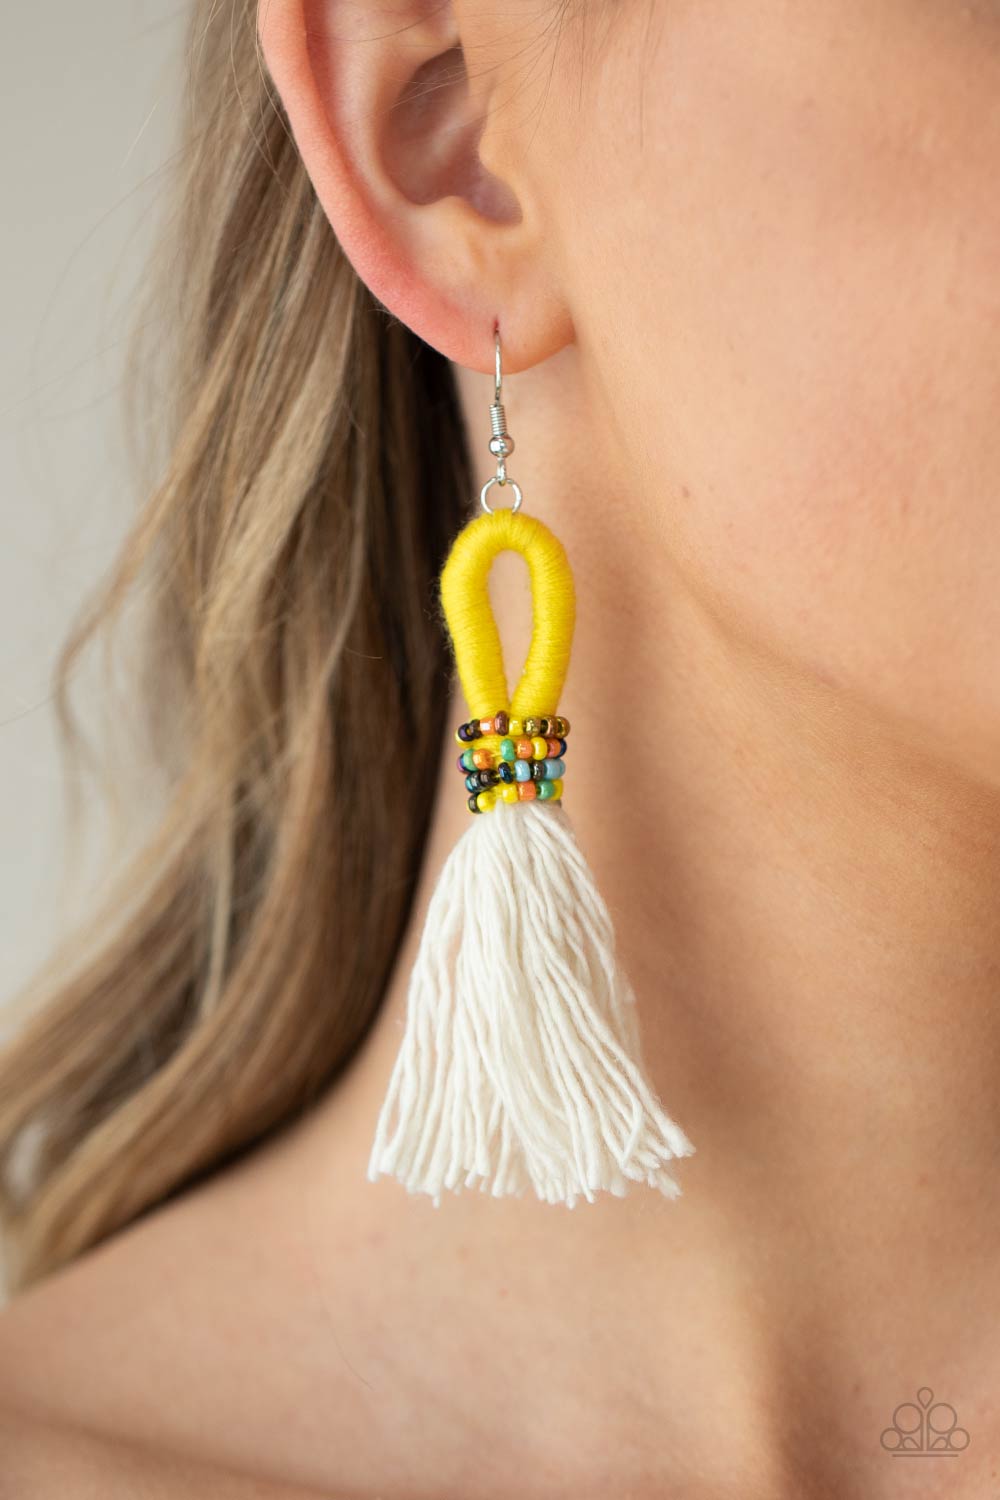 The Dustup - Yellow White & Multi Earrings - Princess Glam Shop